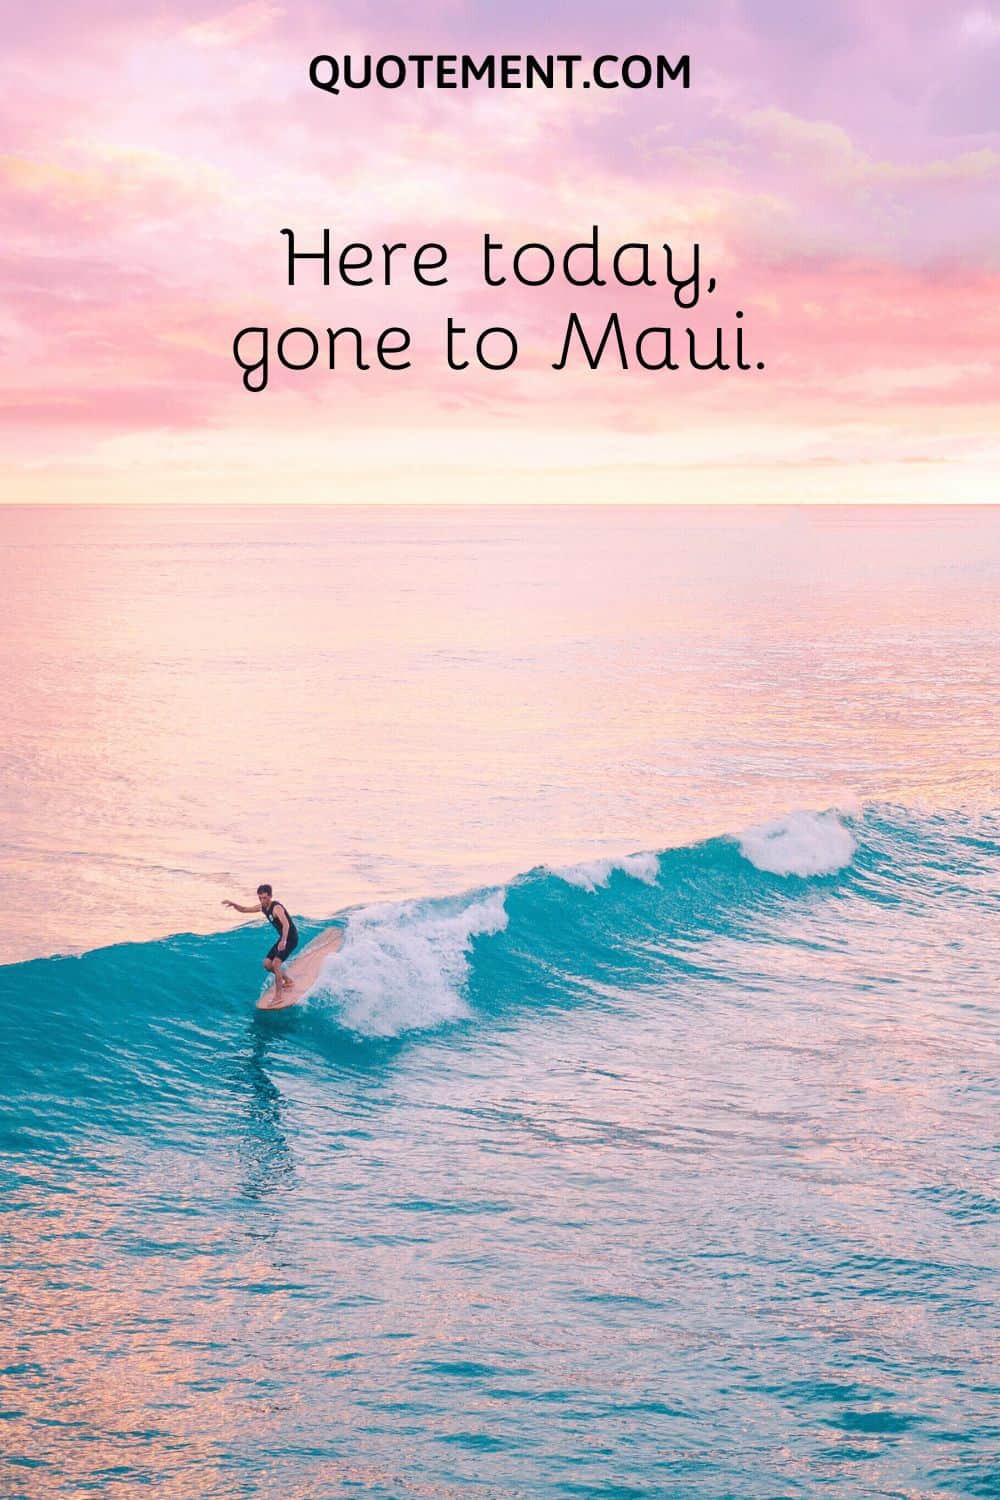 Here today, gone to Maui.